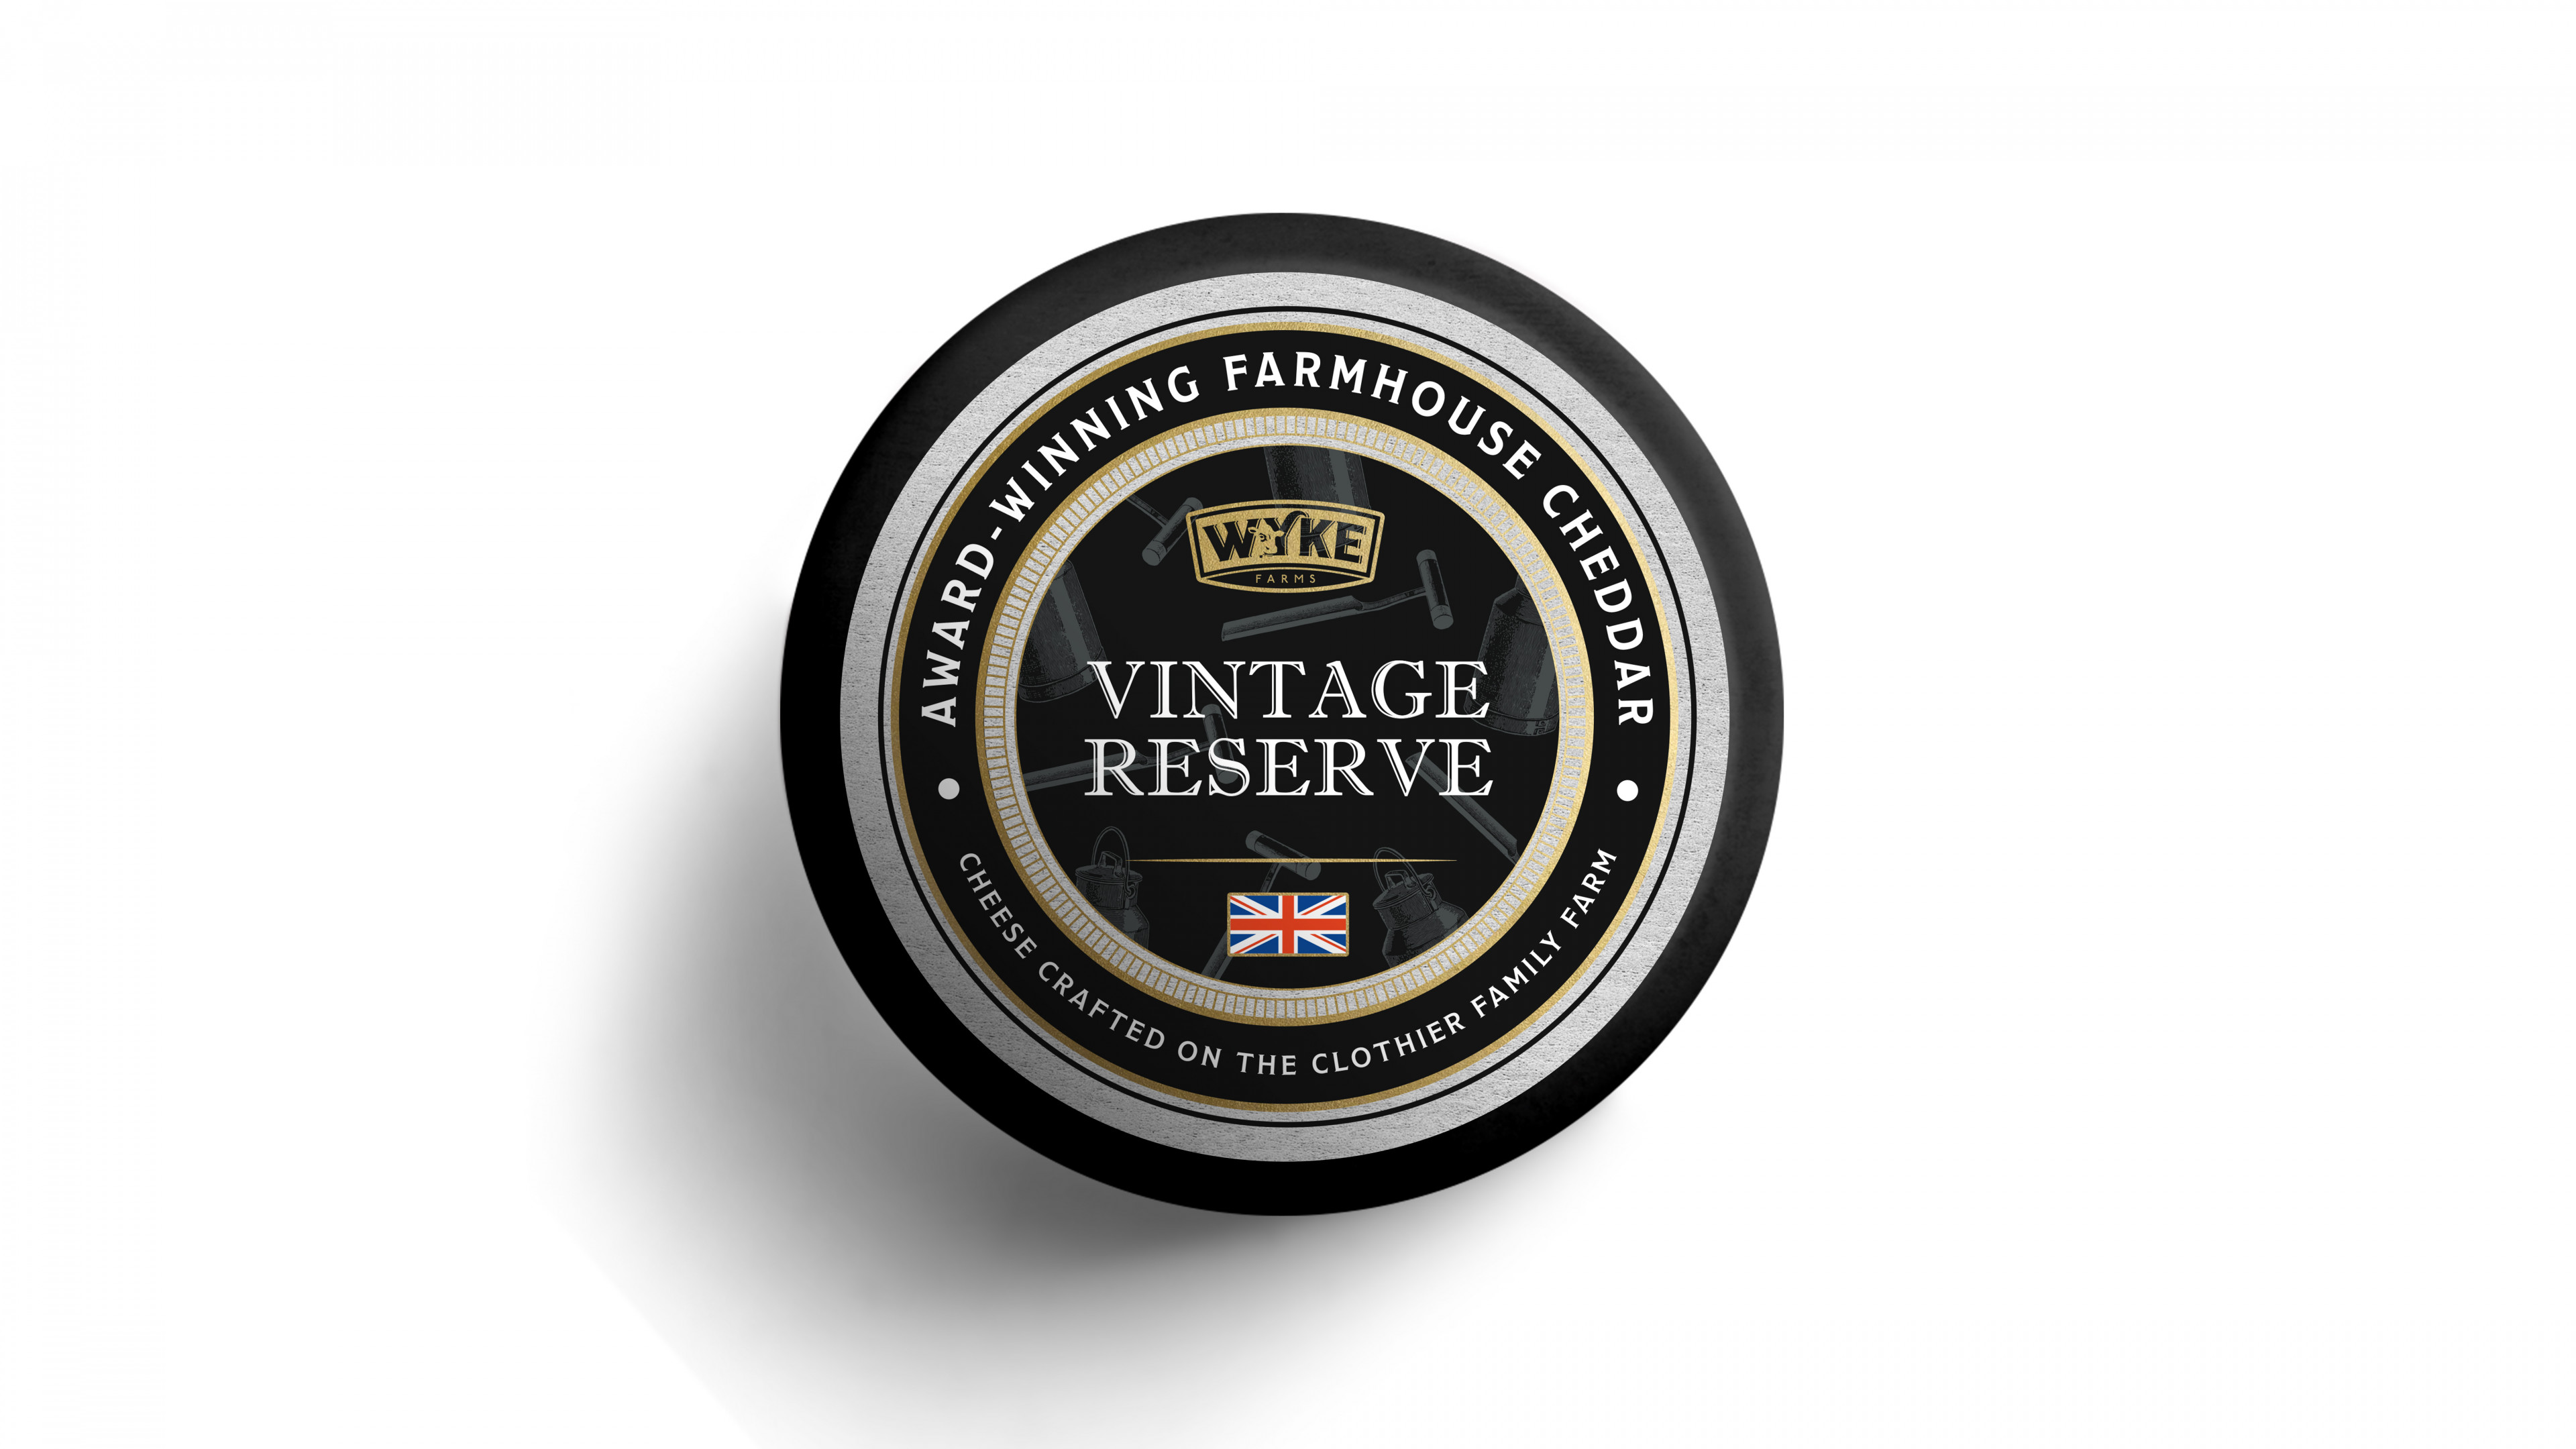 Wyke Farms Ivy Vintage Reserve Cheddar The French Deli And Gourmet Shop